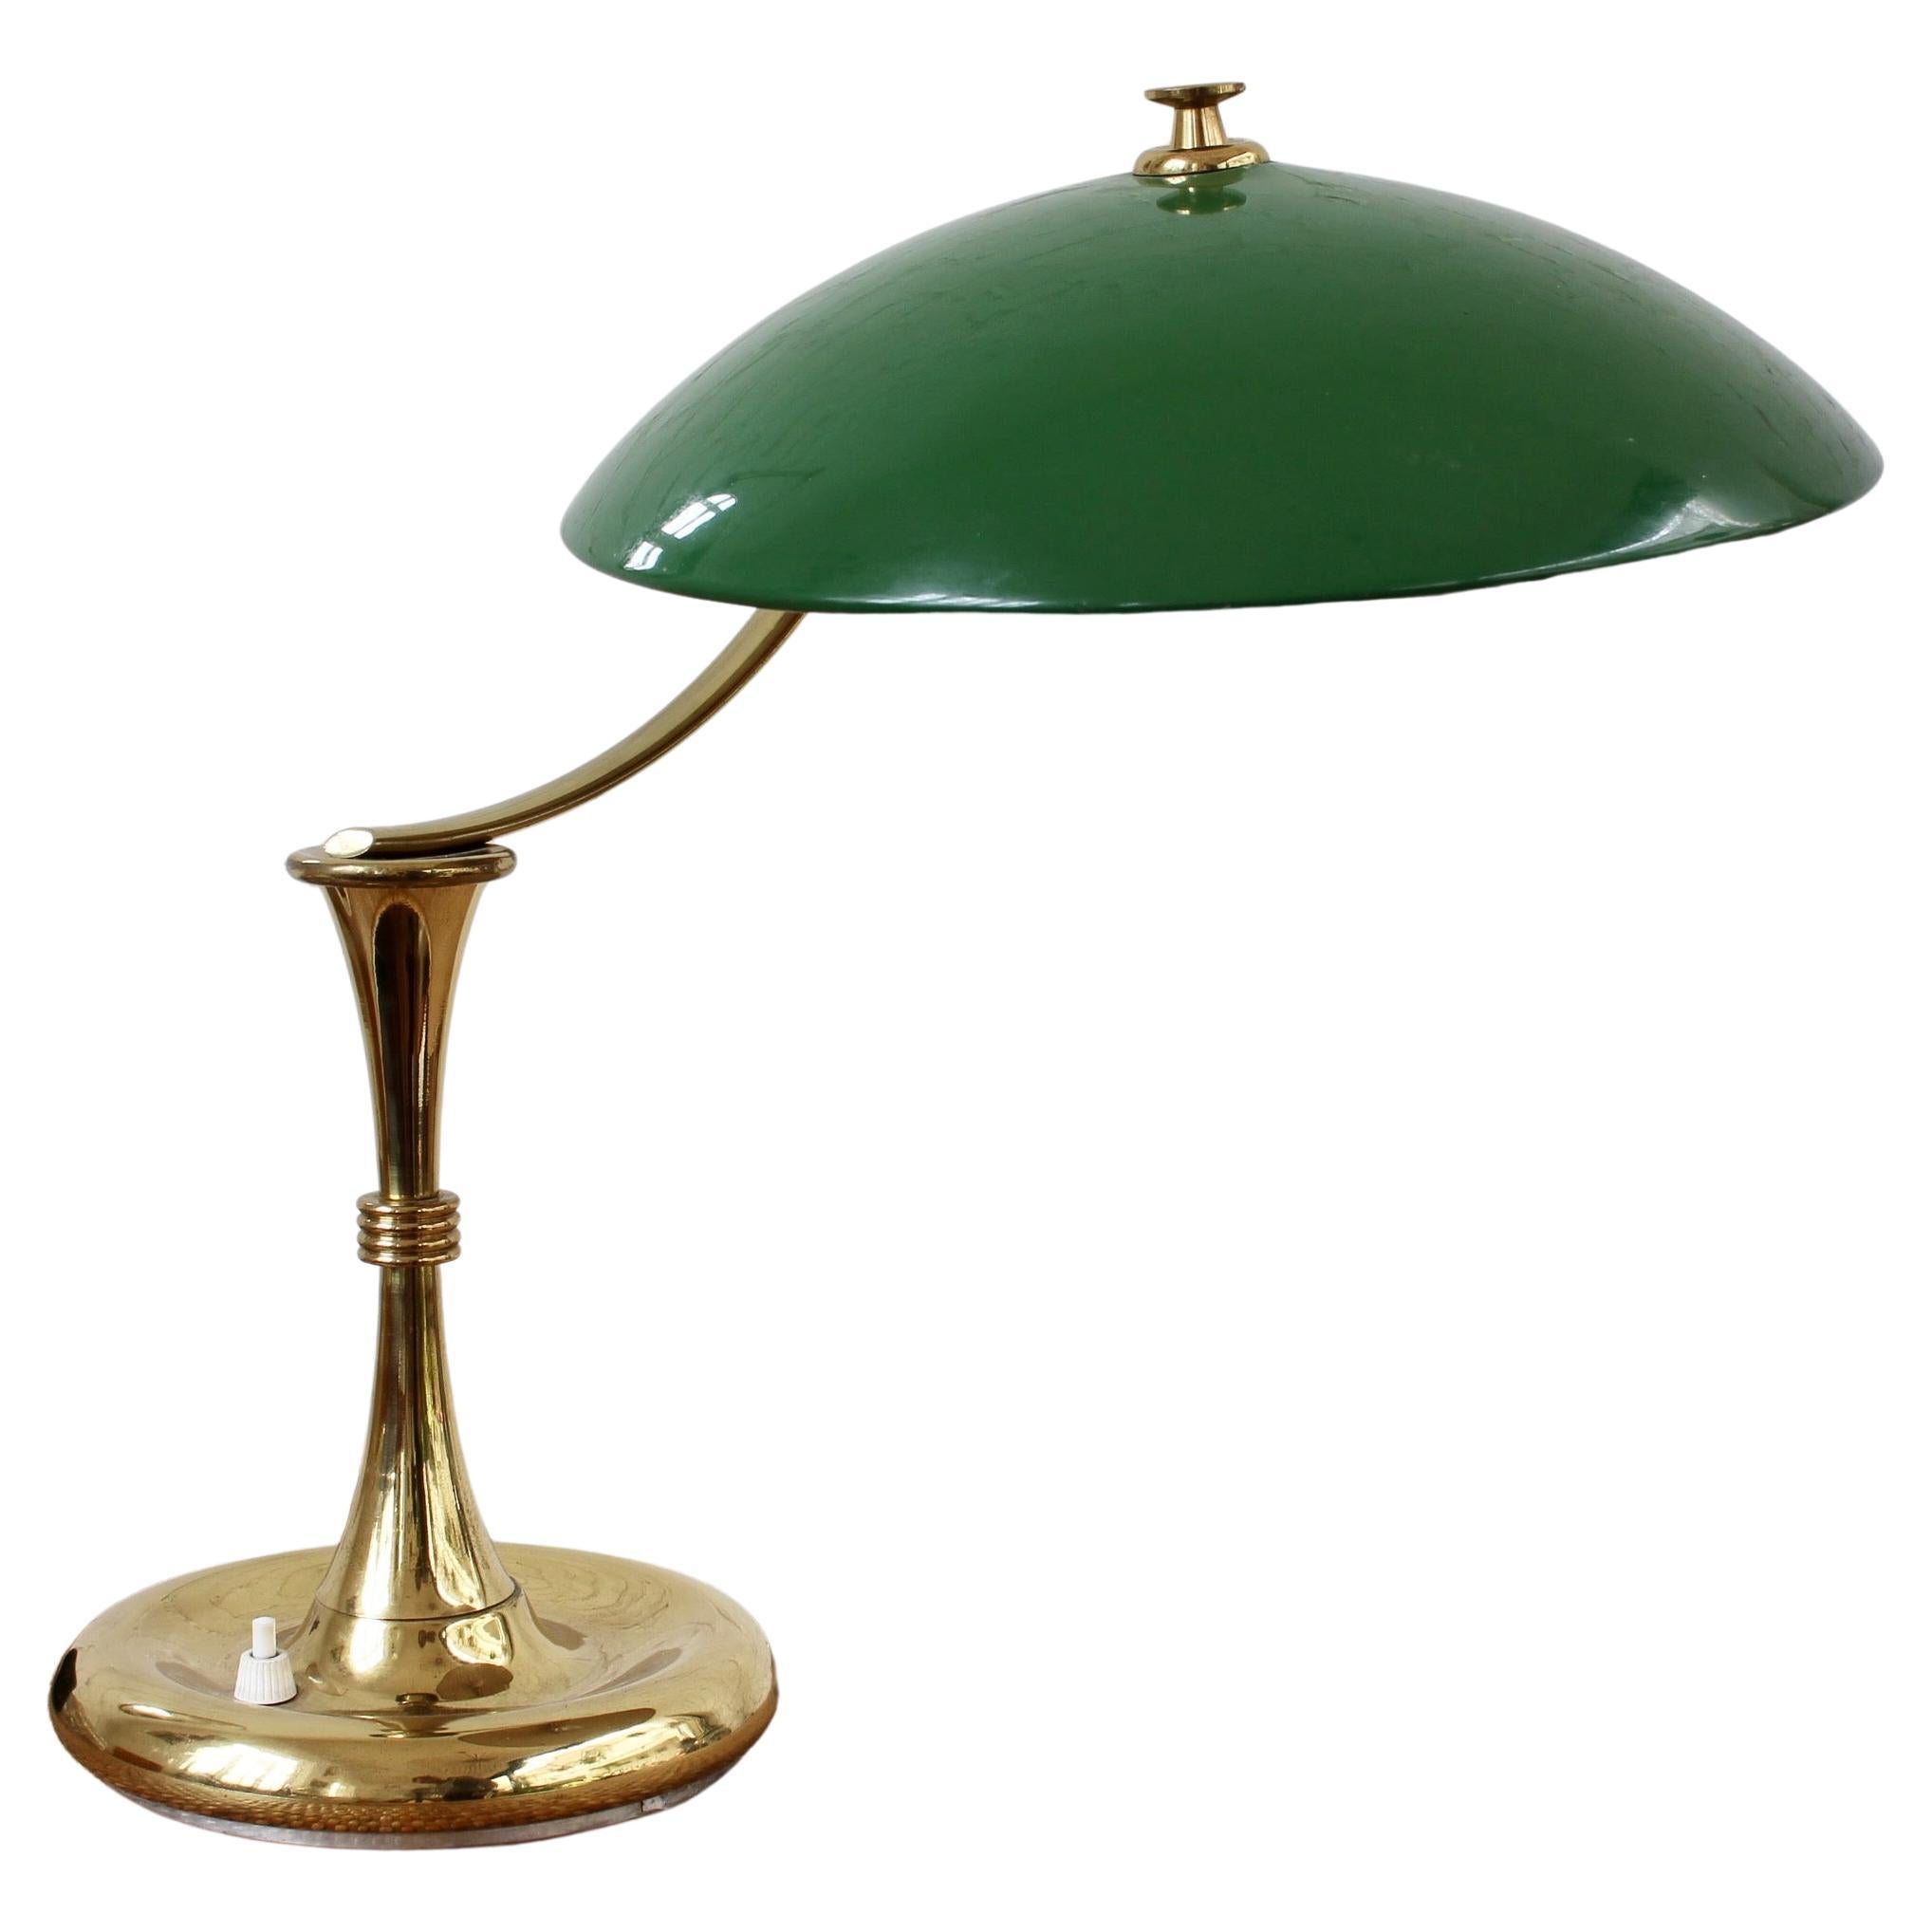 Mid-20th Century Italian Mid-Century Brass-Covered Desk Lamp with Green Shade 'circa 1950s' For Sale